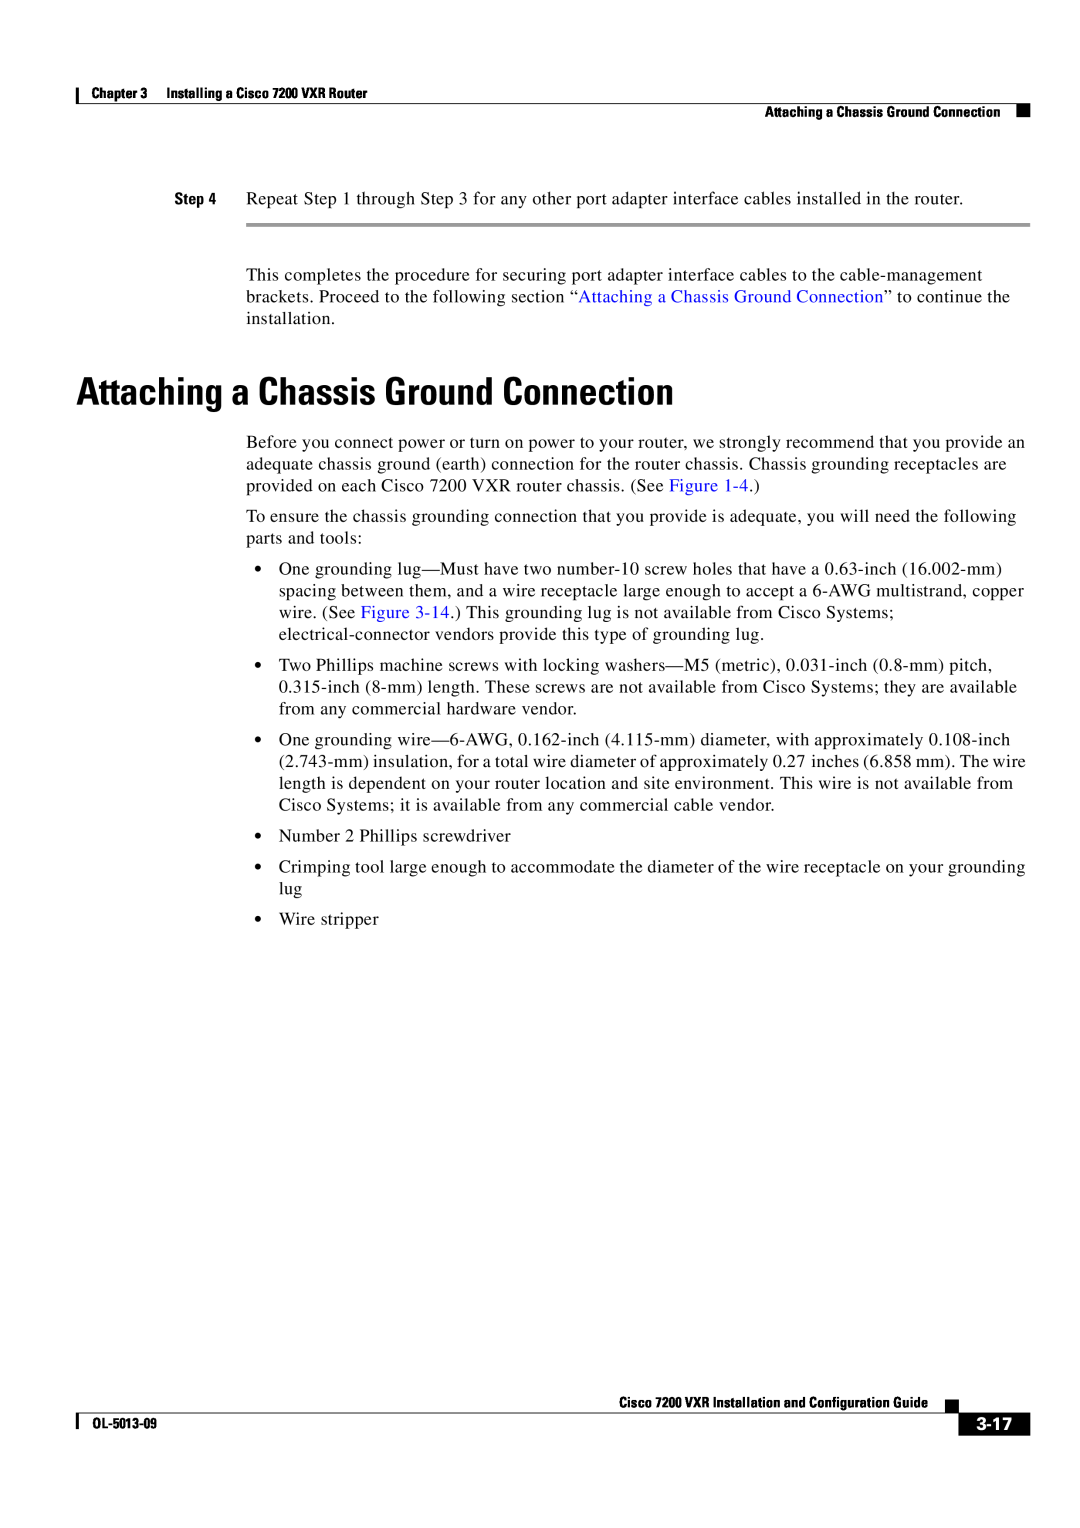 Cisco Systems 7200 VXR manual Attaching a Chassis Ground Connection, 3-17 